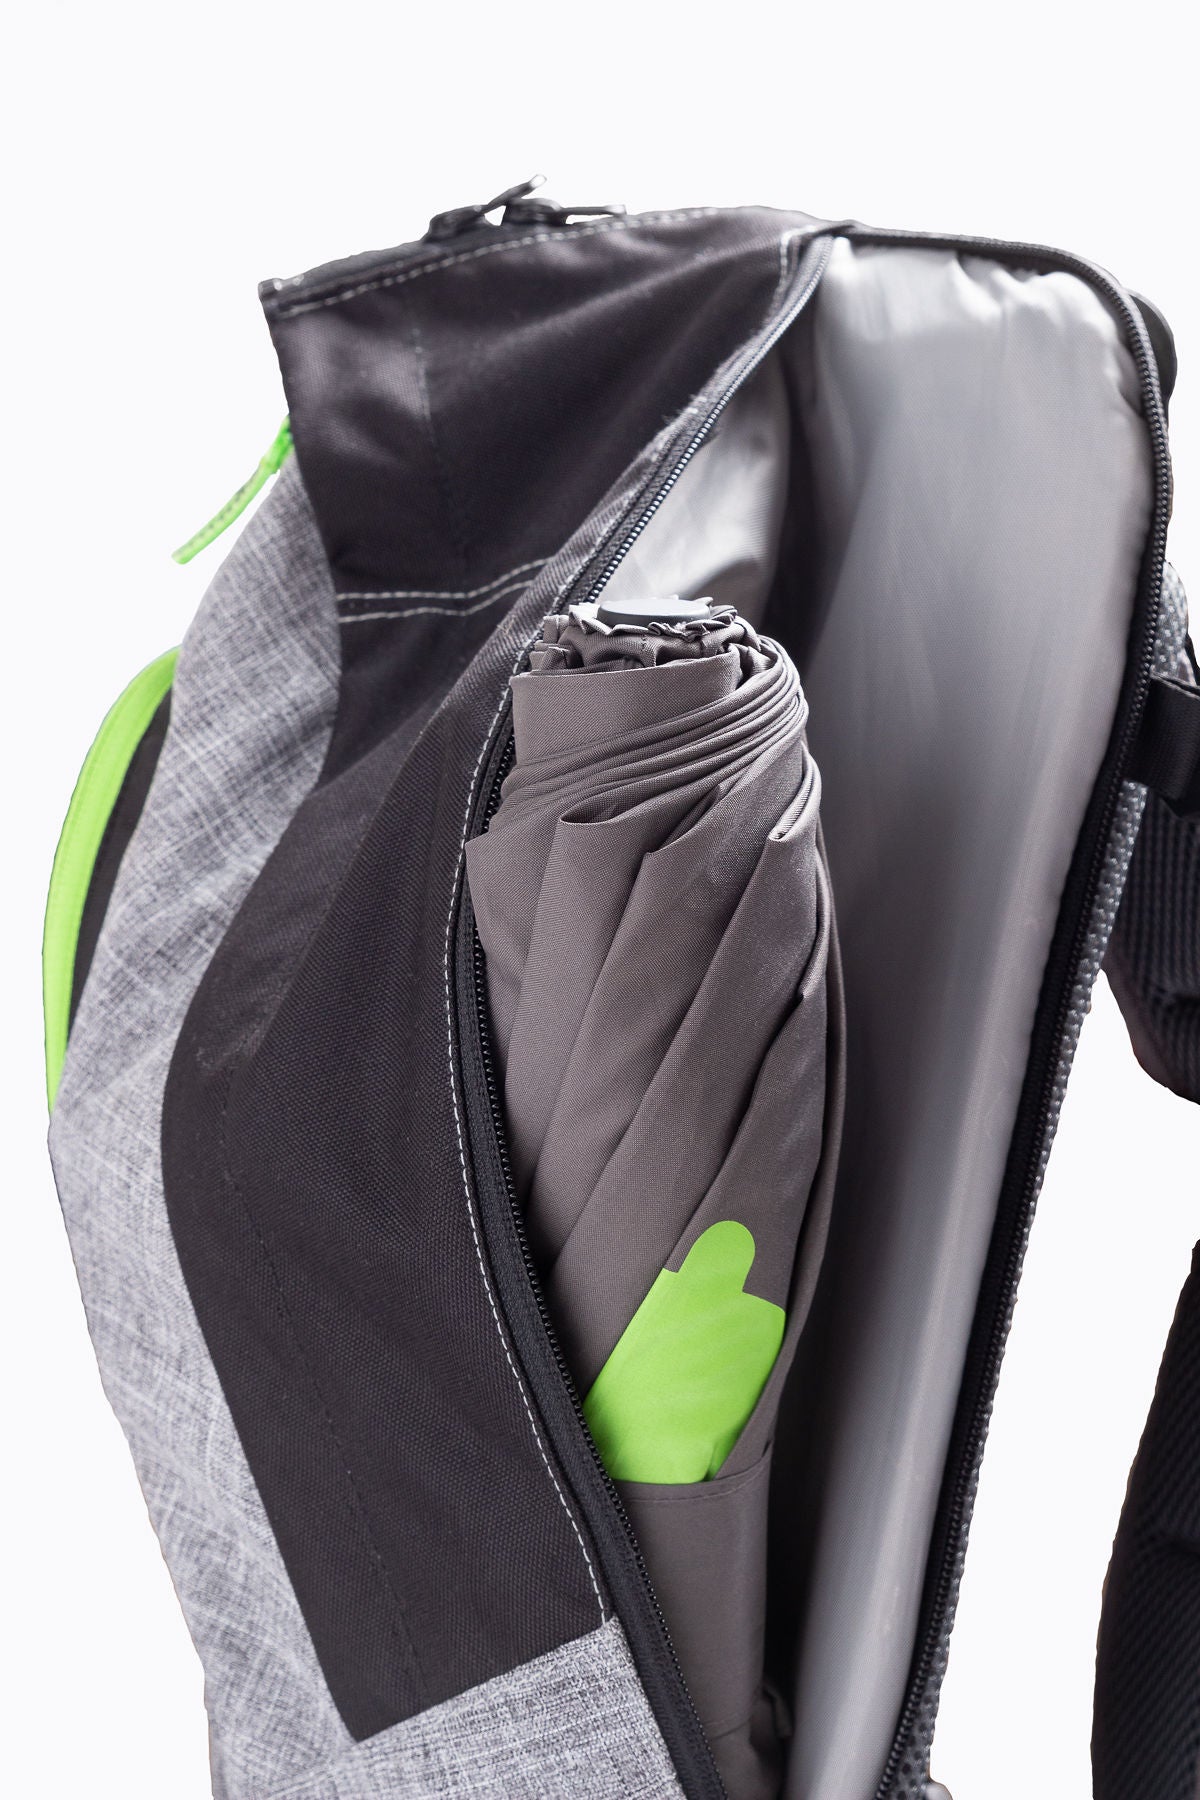 Umbre Excursion Backpack product image, grey with black and green highlights , showing waterproof pocket with included umbrella that is in storage.